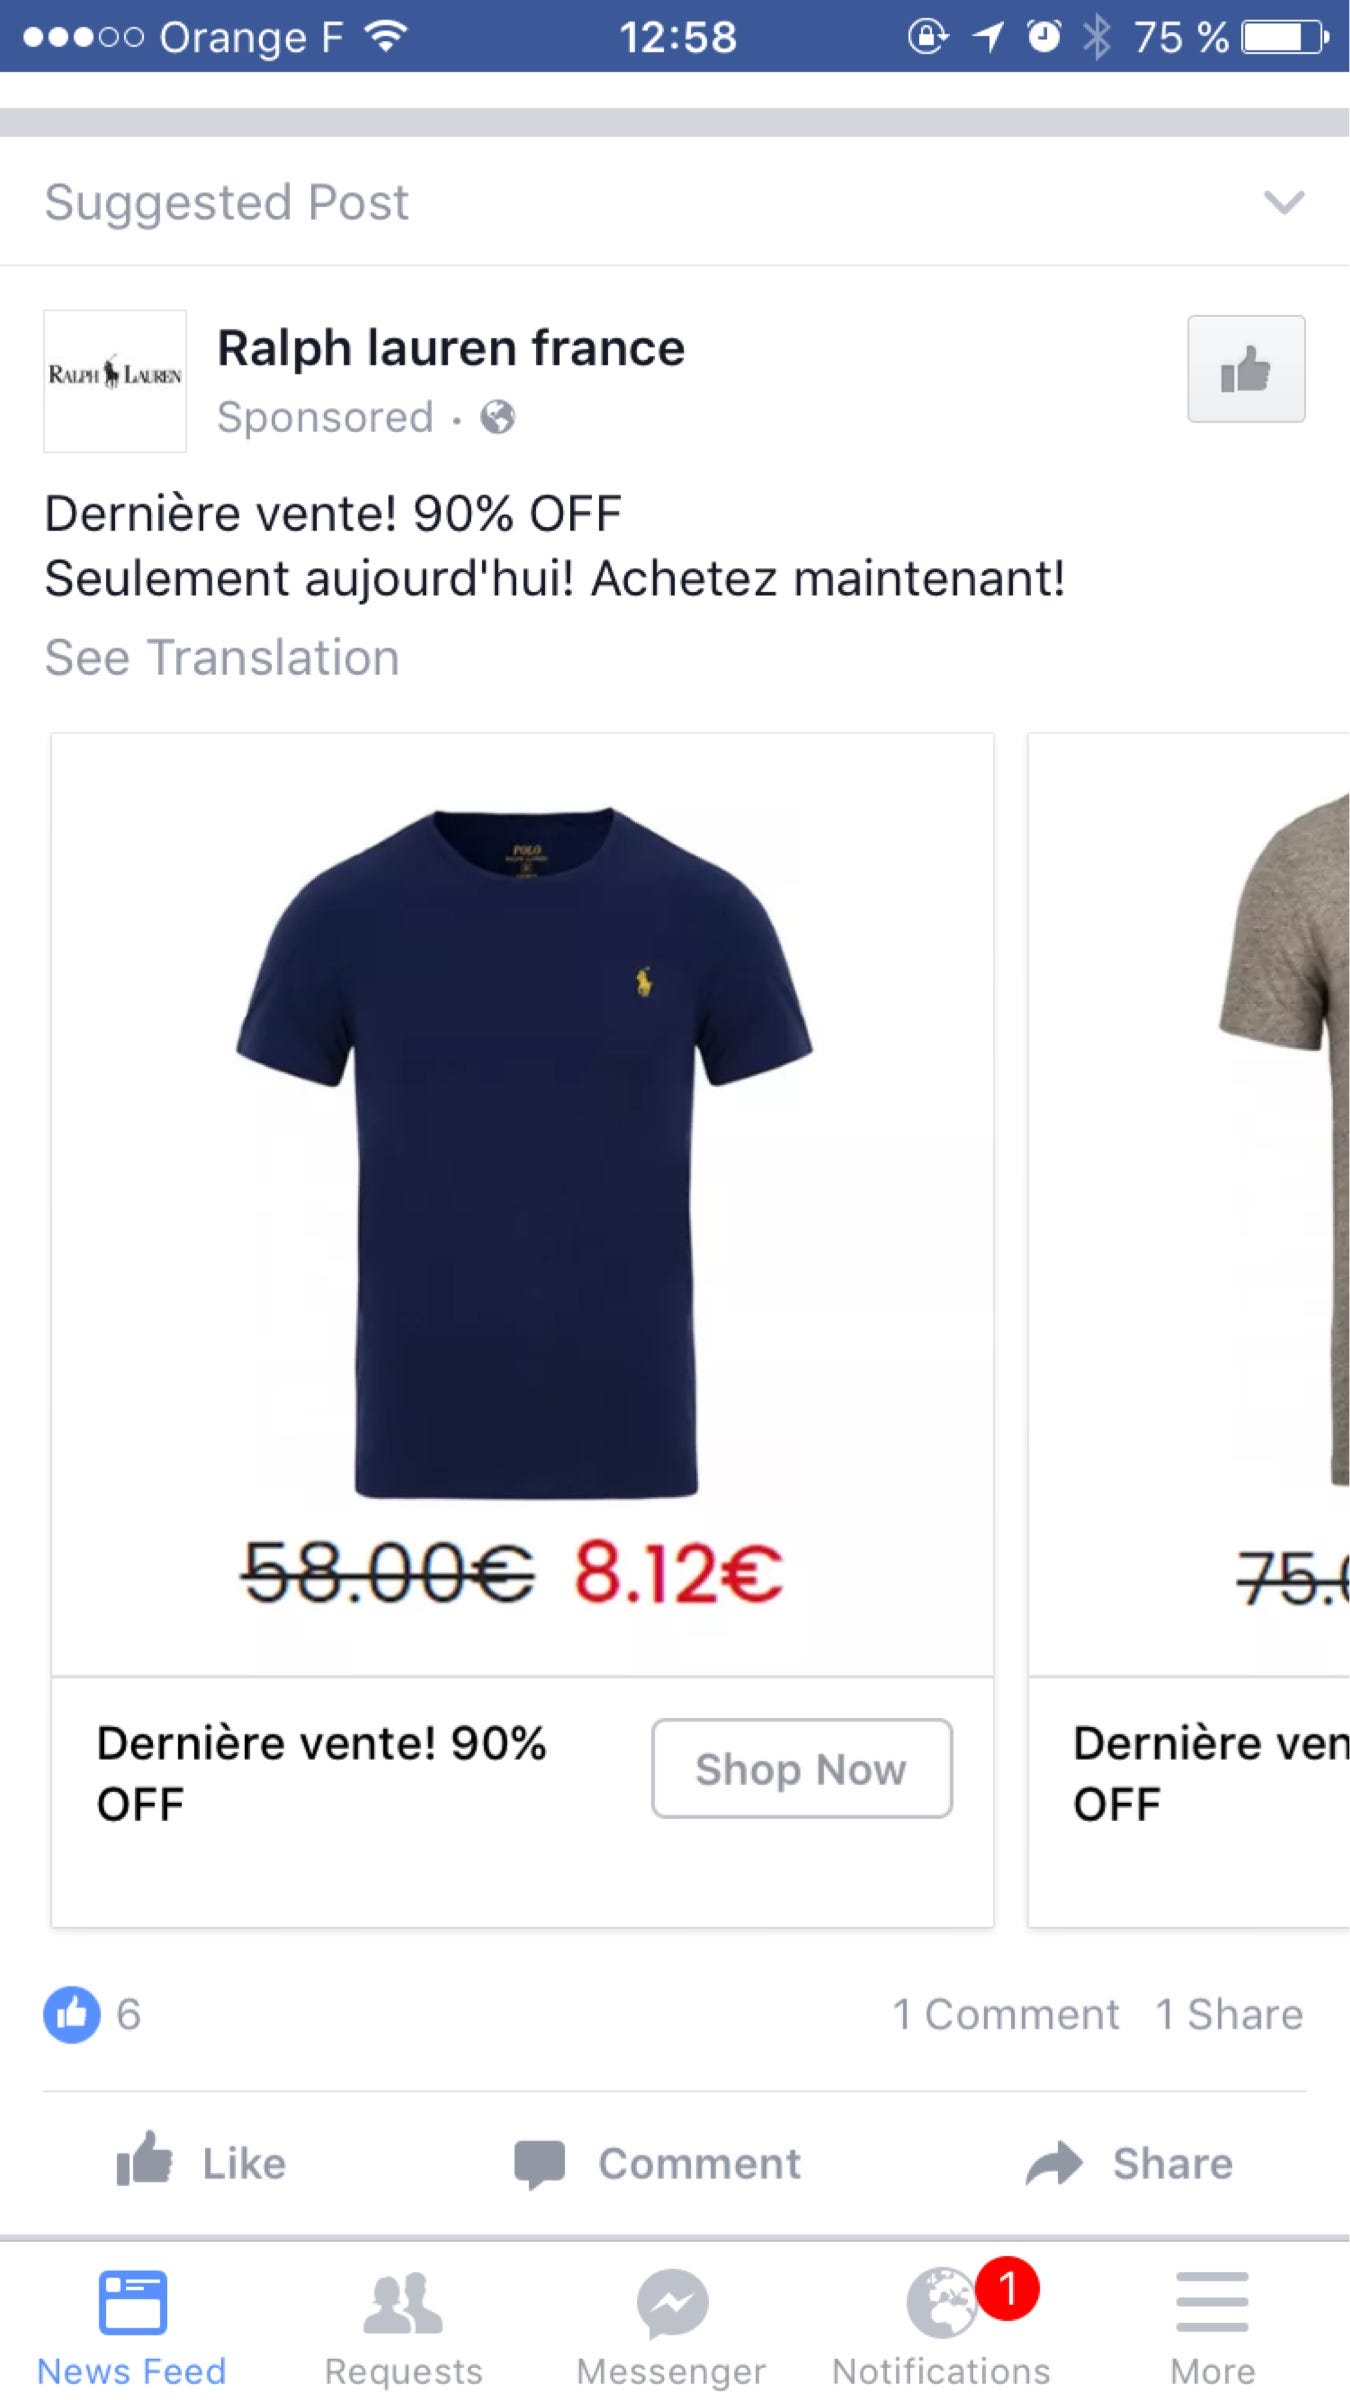 Why Facebook is allowing fake and scam shops to run ads?